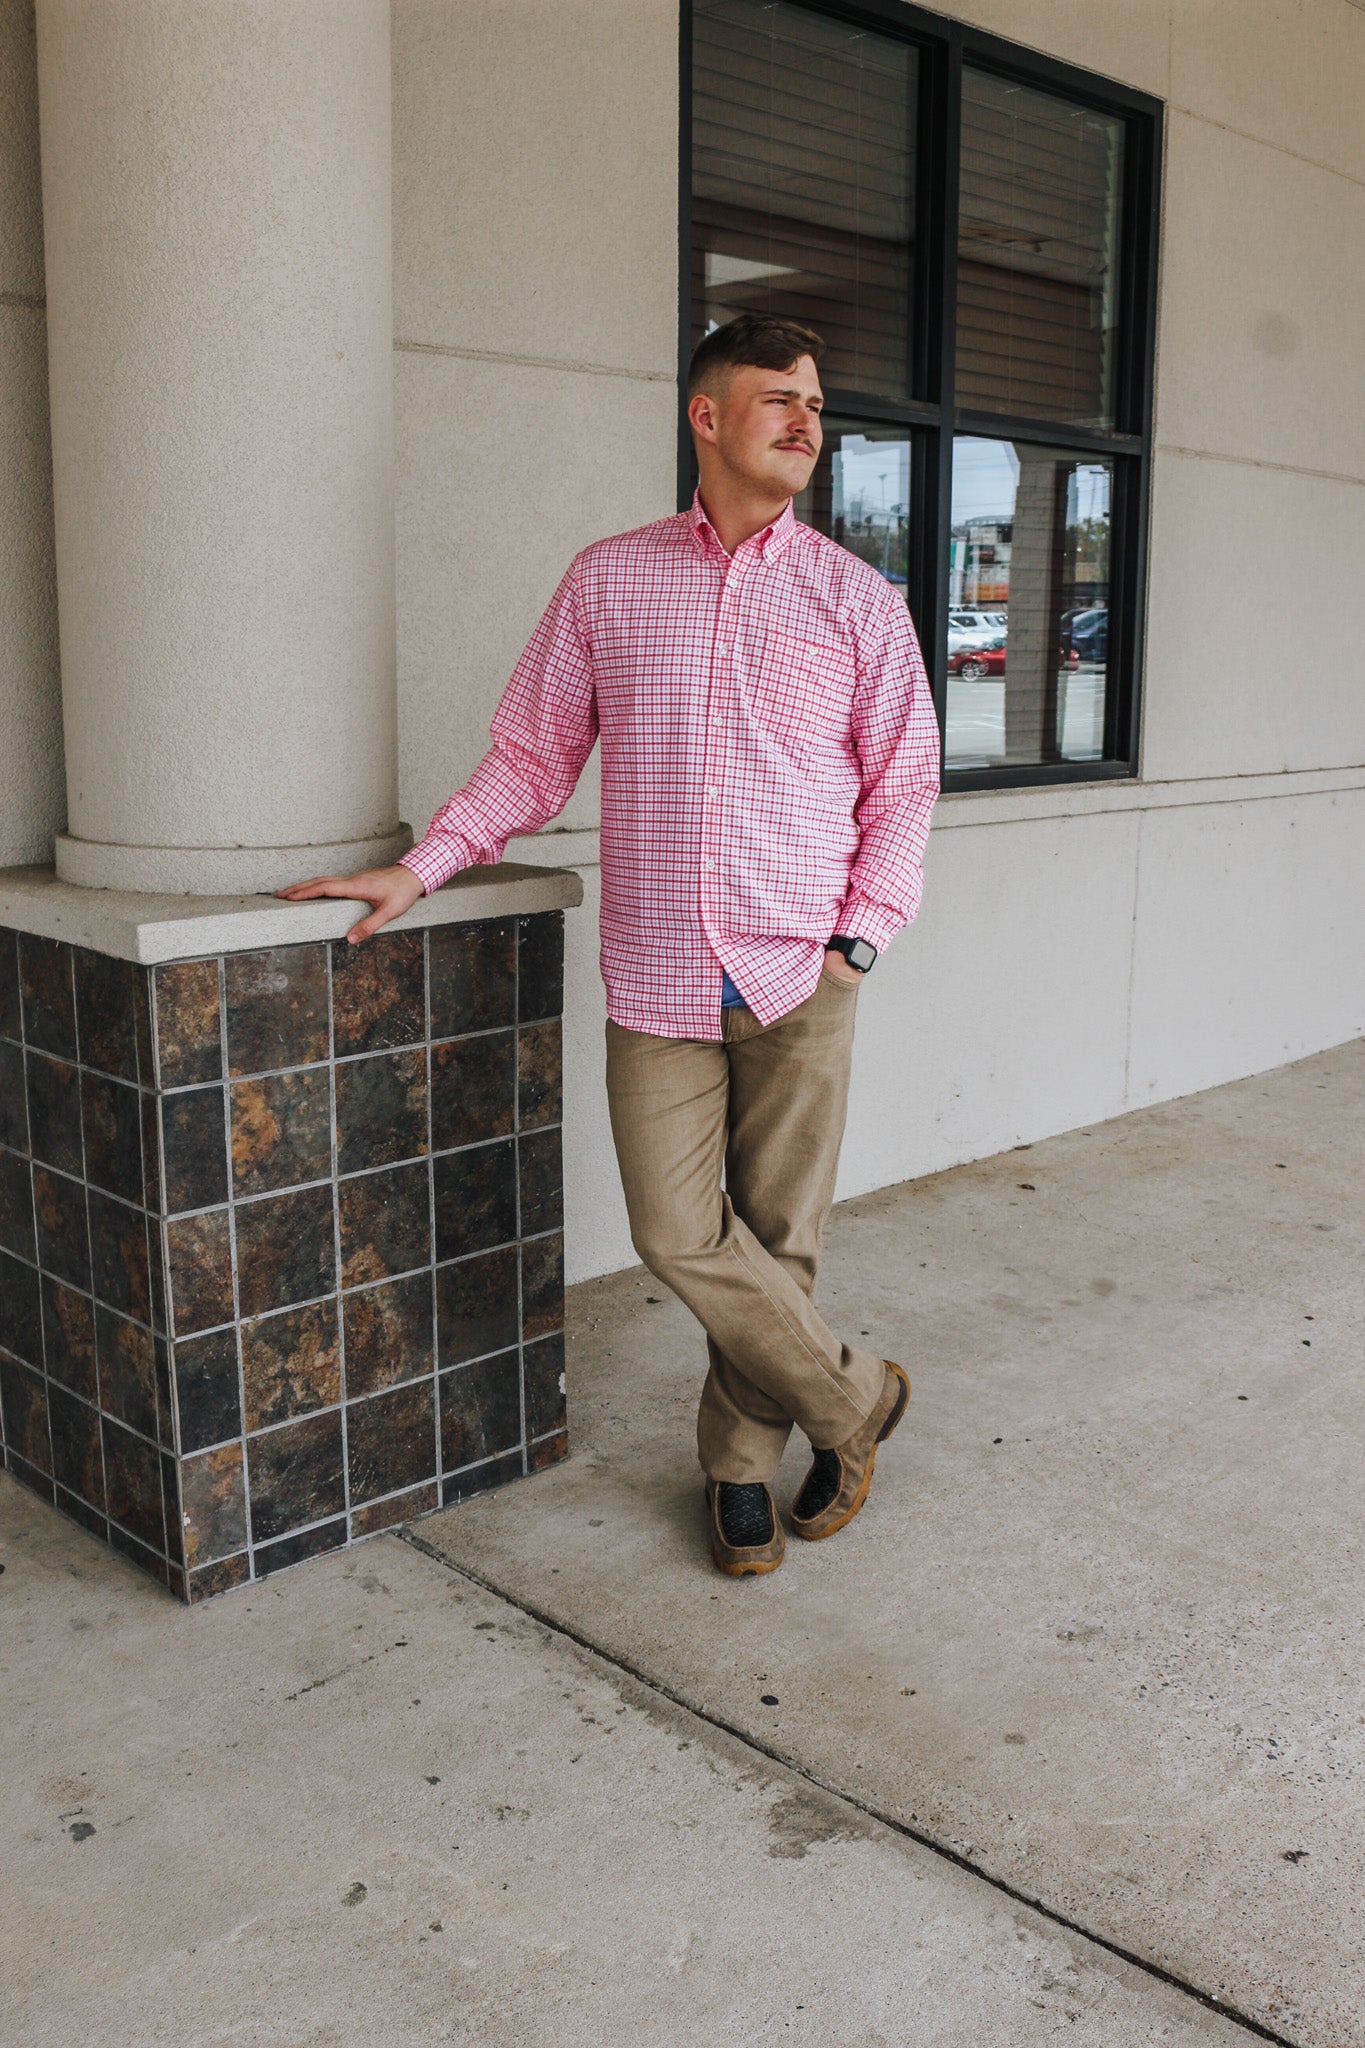 Men's Coral Pink Striped Button Up Shirt